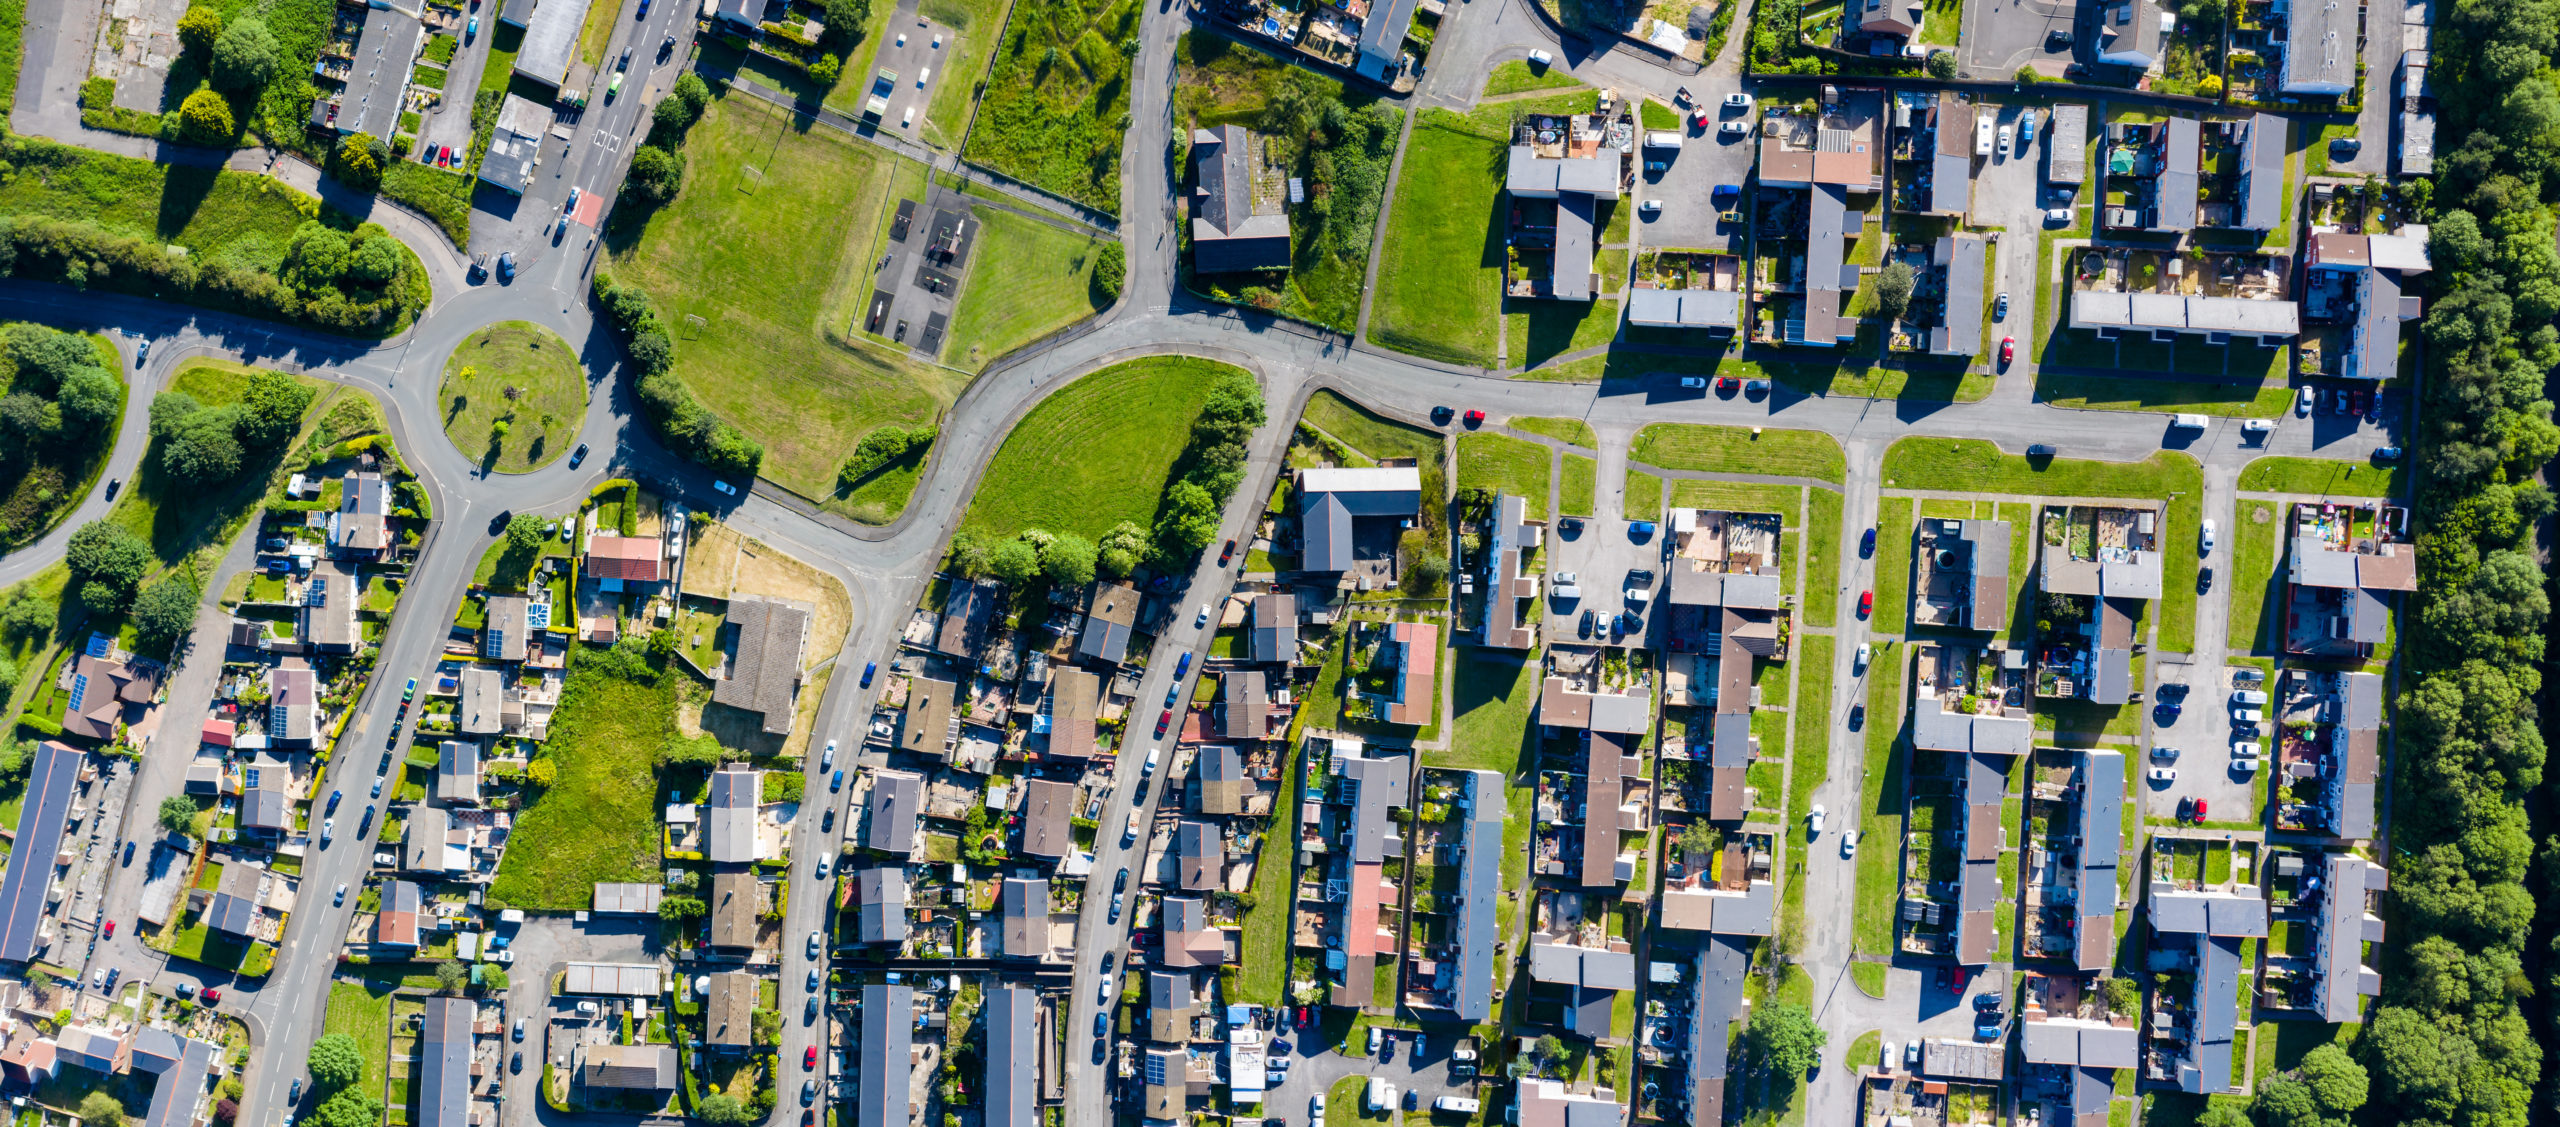 Aerial drone view of small winding streets and roads in a residential area of a small town